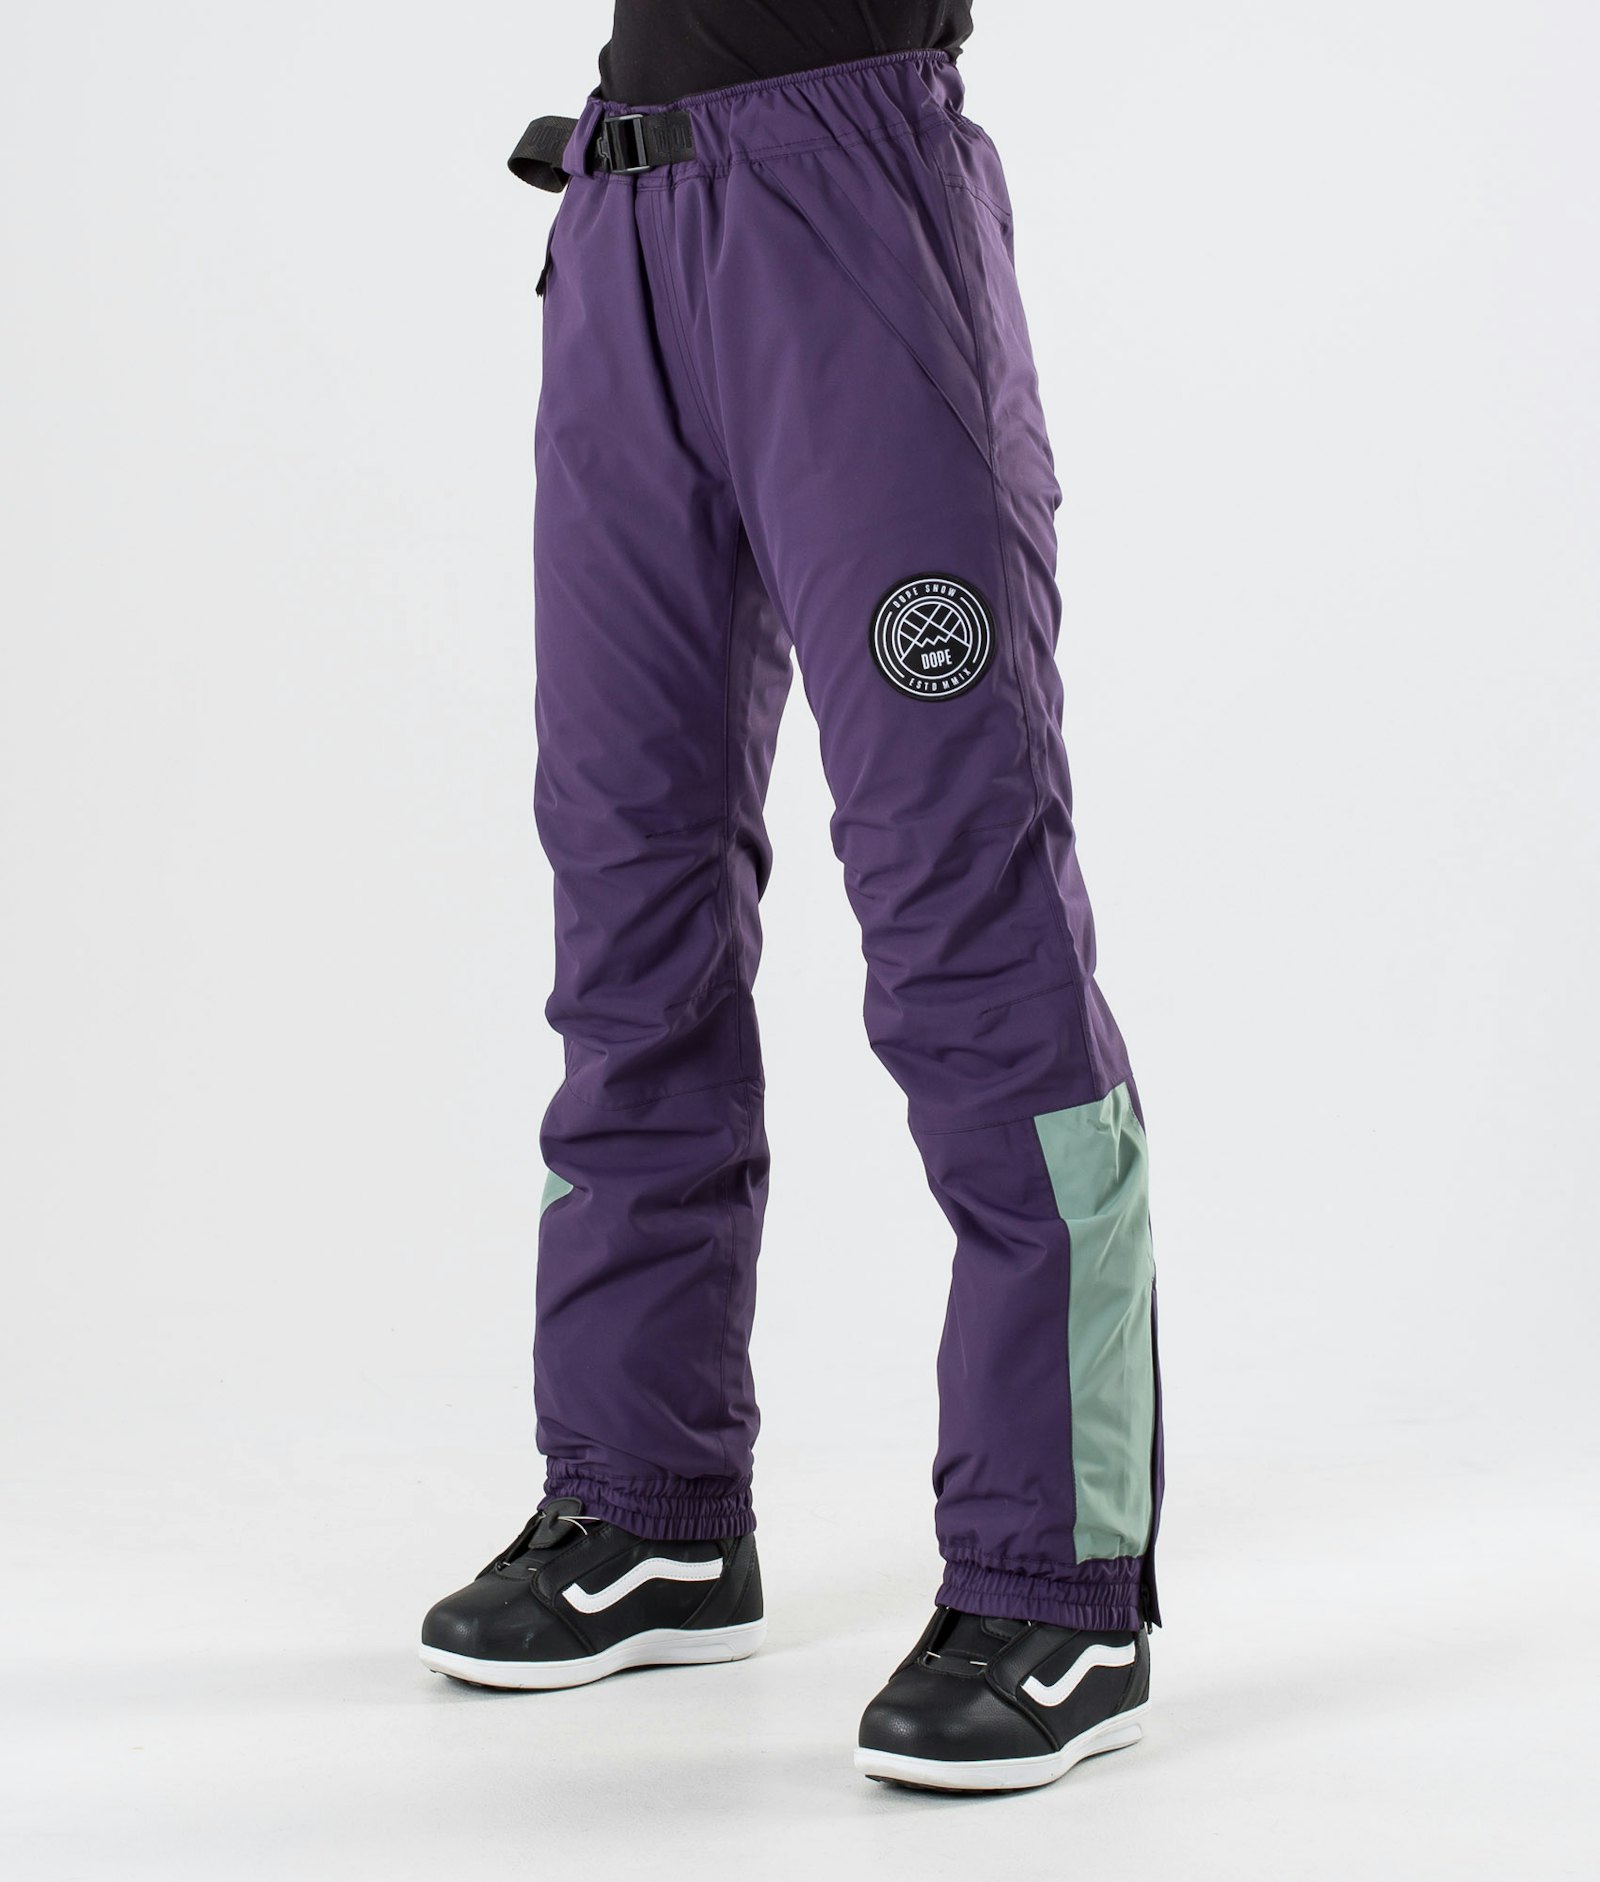 Dope Blizzard W 2019 Snowboard Broek Dames Limited Edition Grape/Faded Green